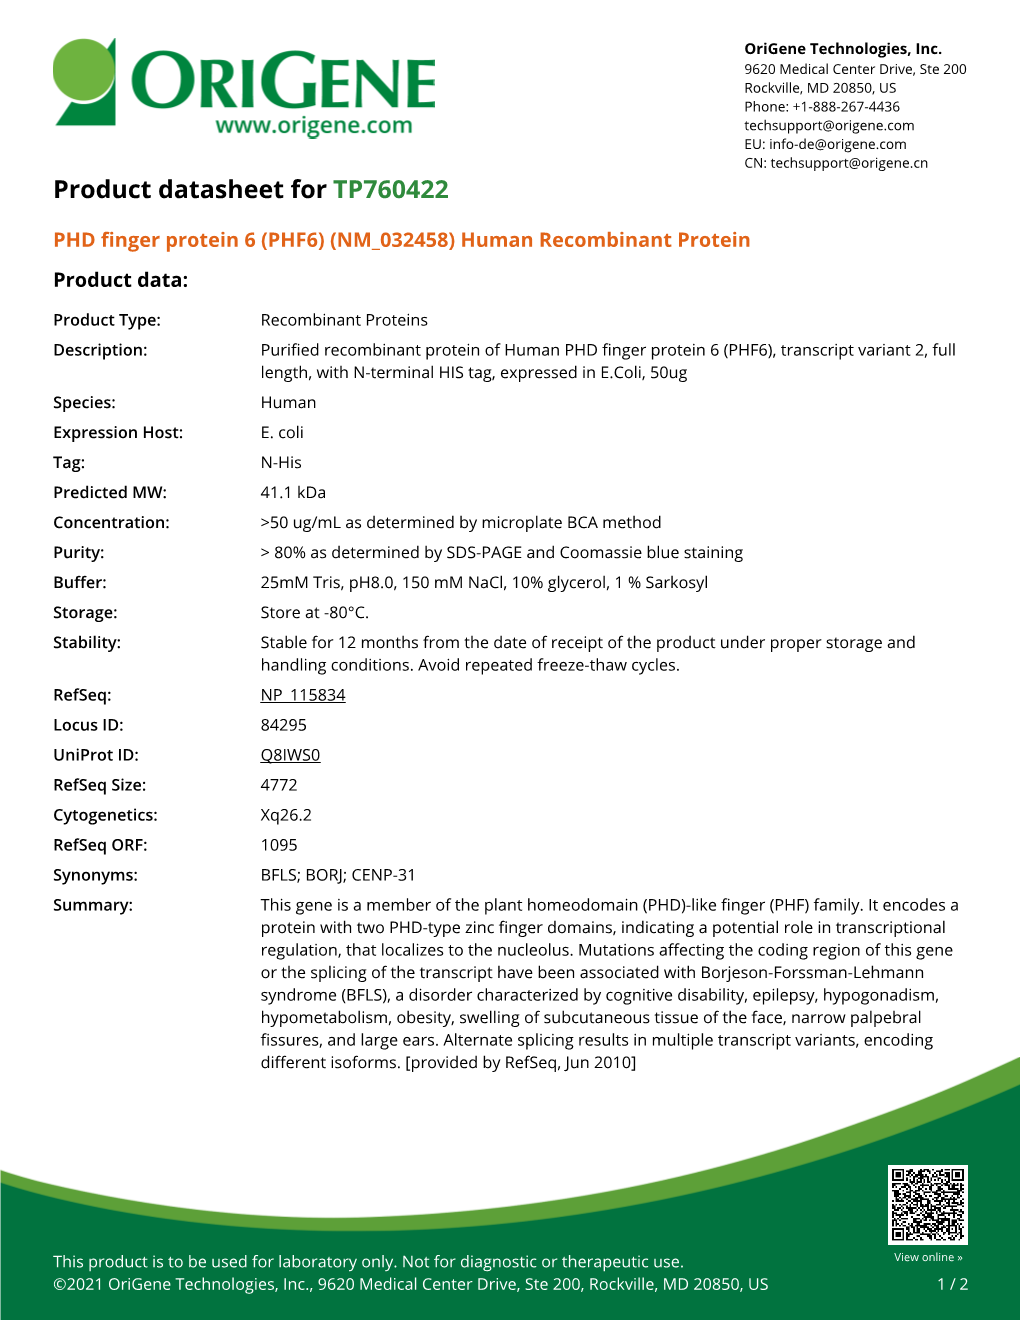 PHD Finger Protein 6 (PHF6) (NM 032458) Human Recombinant Protein Product Data